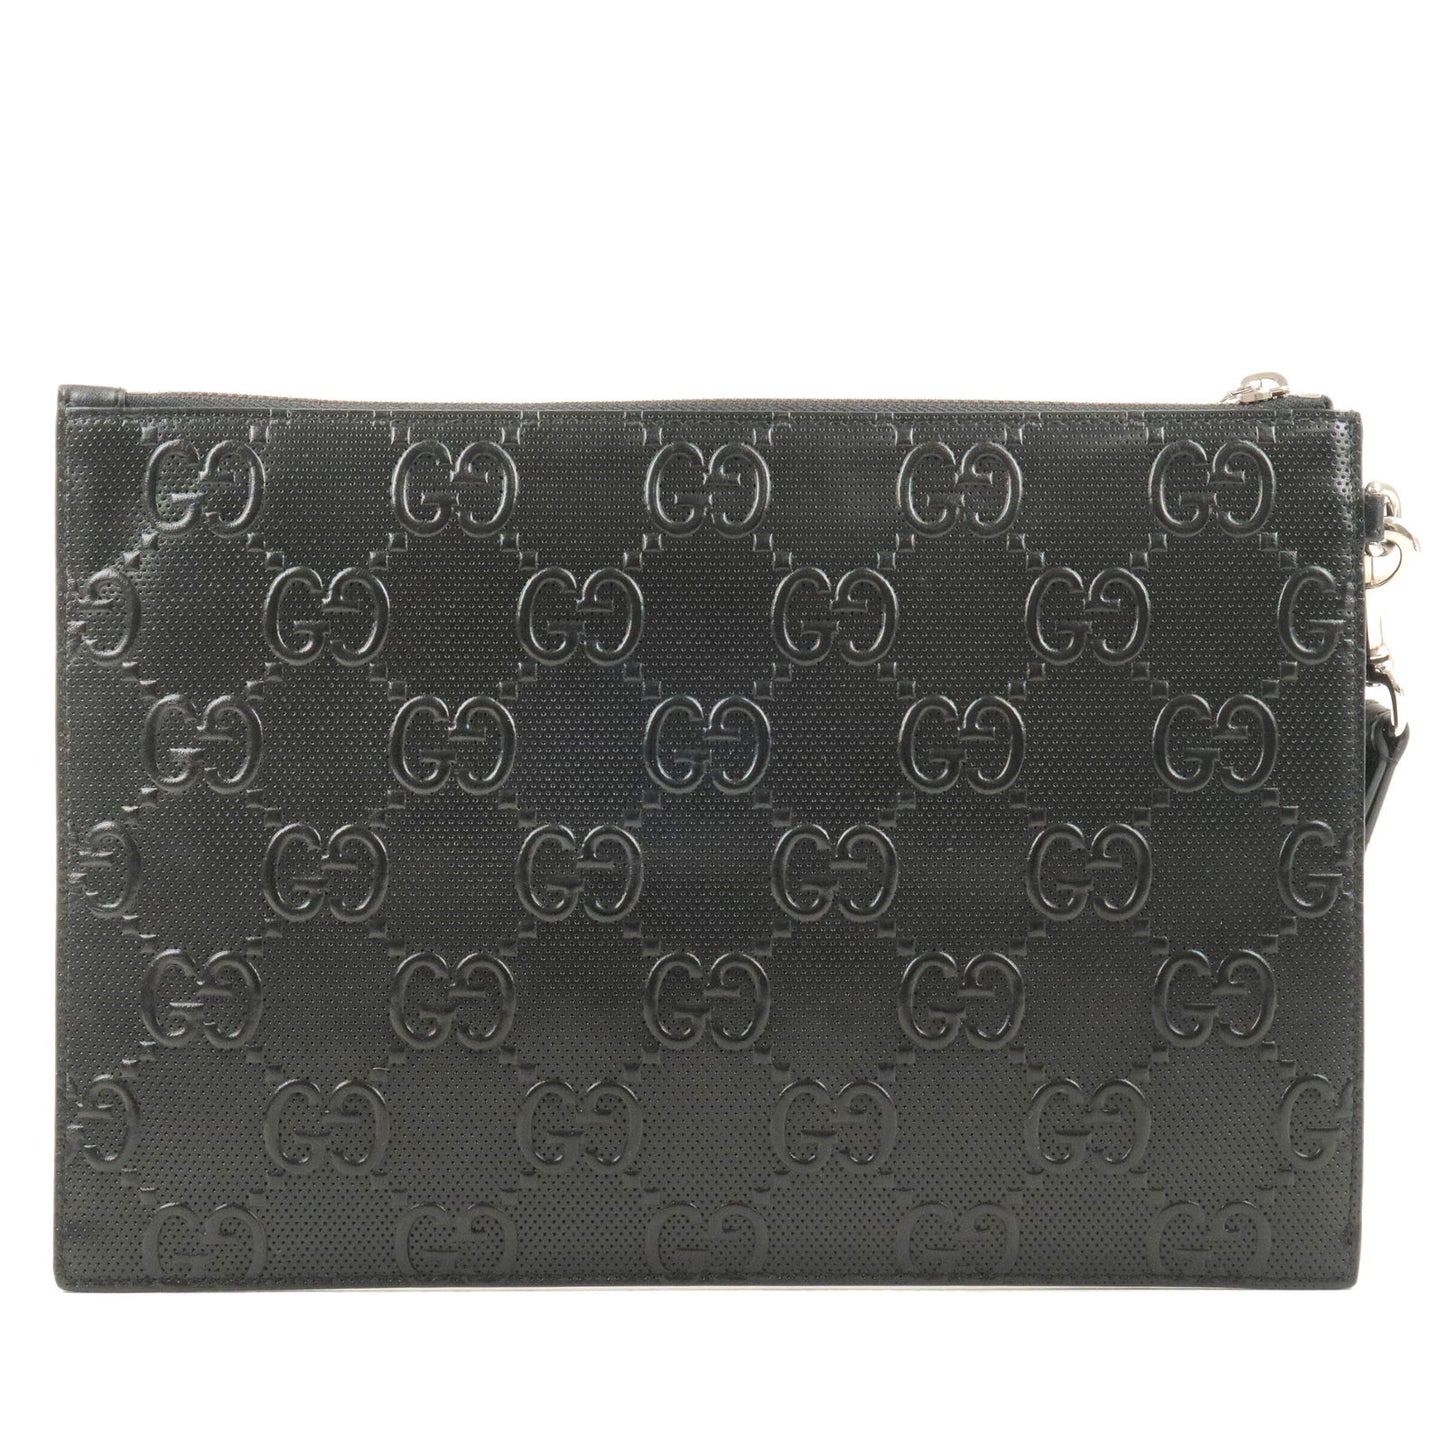 GUCCI GG Emboss Leather Clutch Bag Business Bag Black 625569